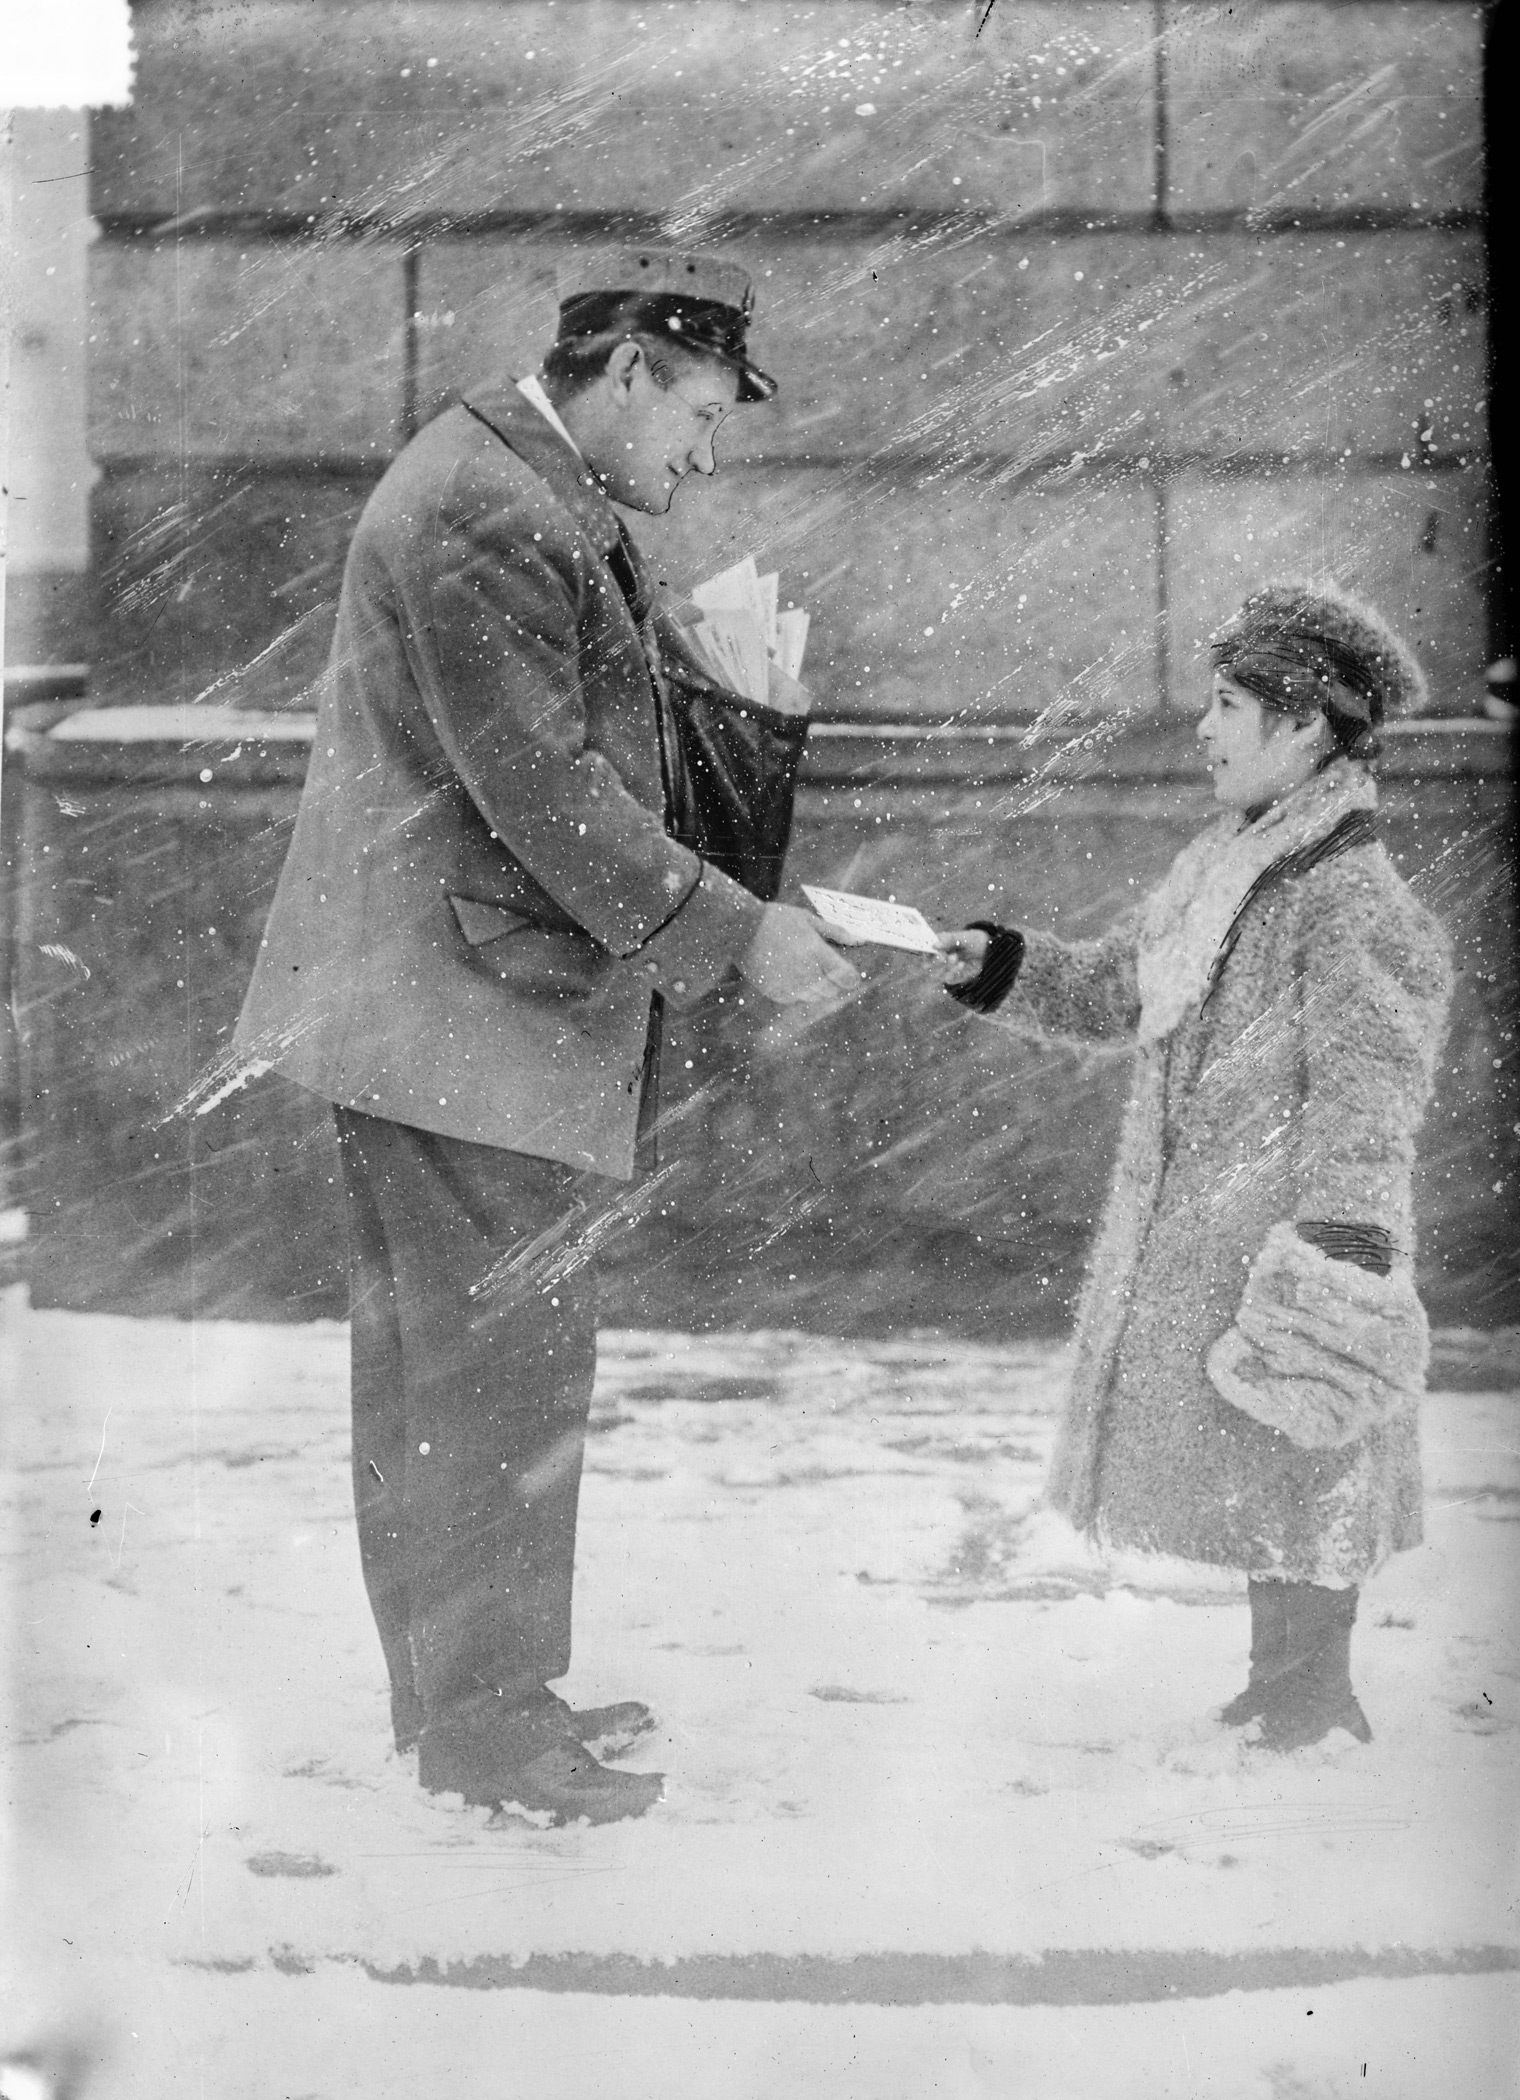 Letter for Santa Claus, ca. 1910.